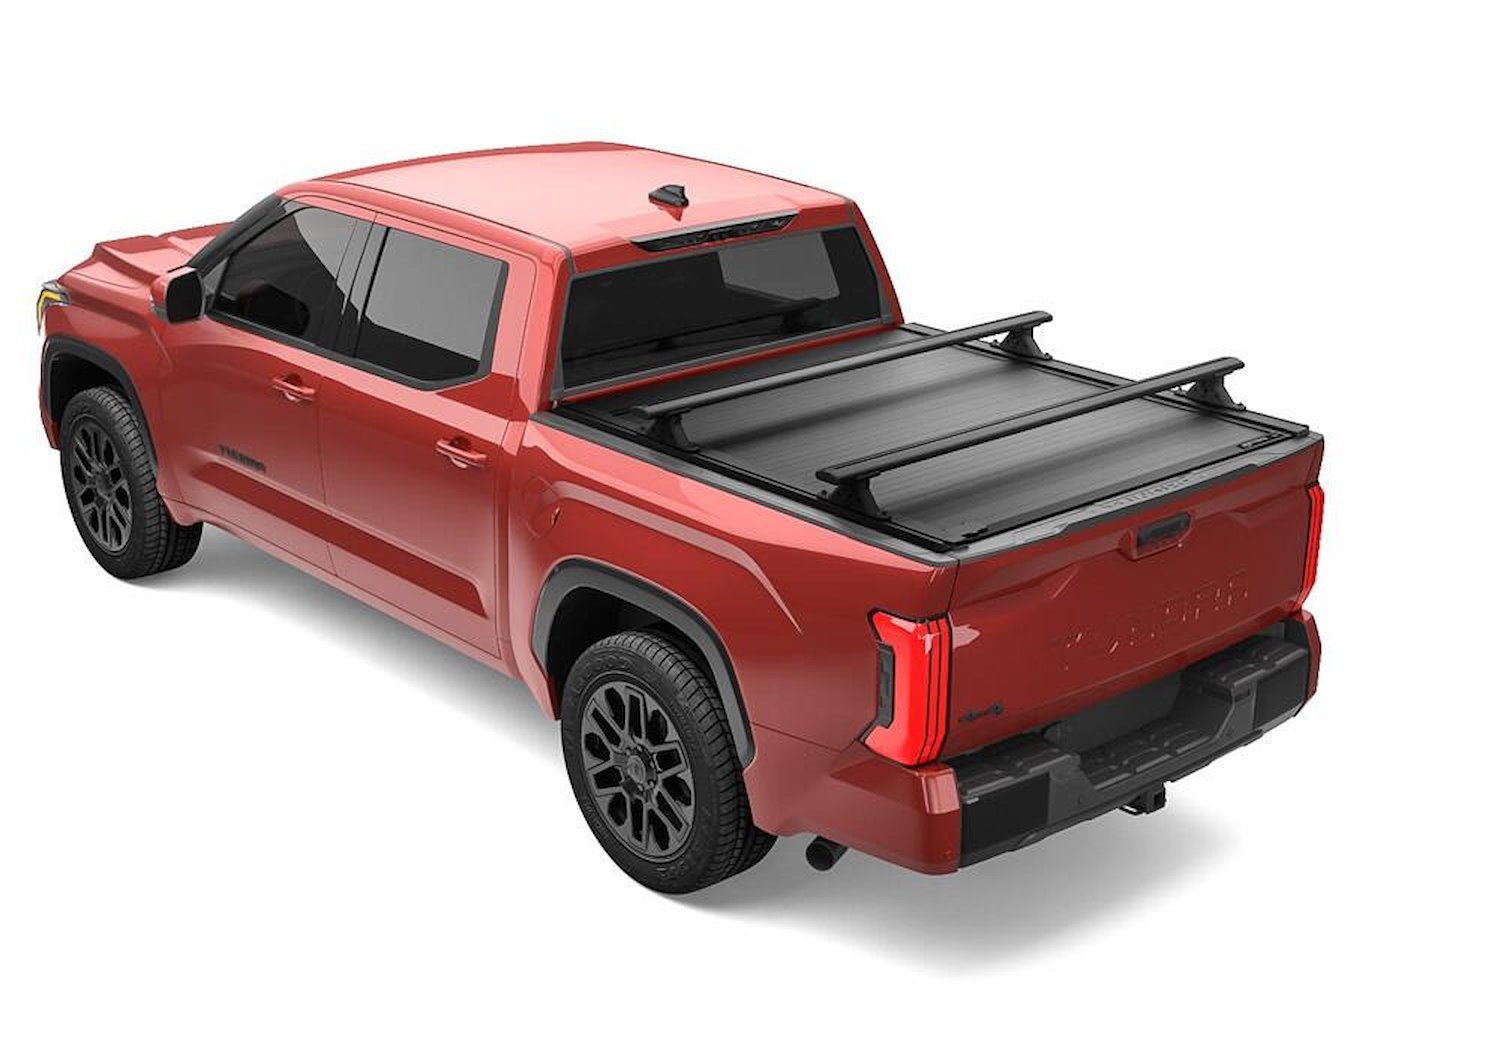 T-60861 RetraxOne XR Retractable Tonneau Cover Fits Select Toyota Tundra CrewMax 5' 7" Bed with Deck Rail System